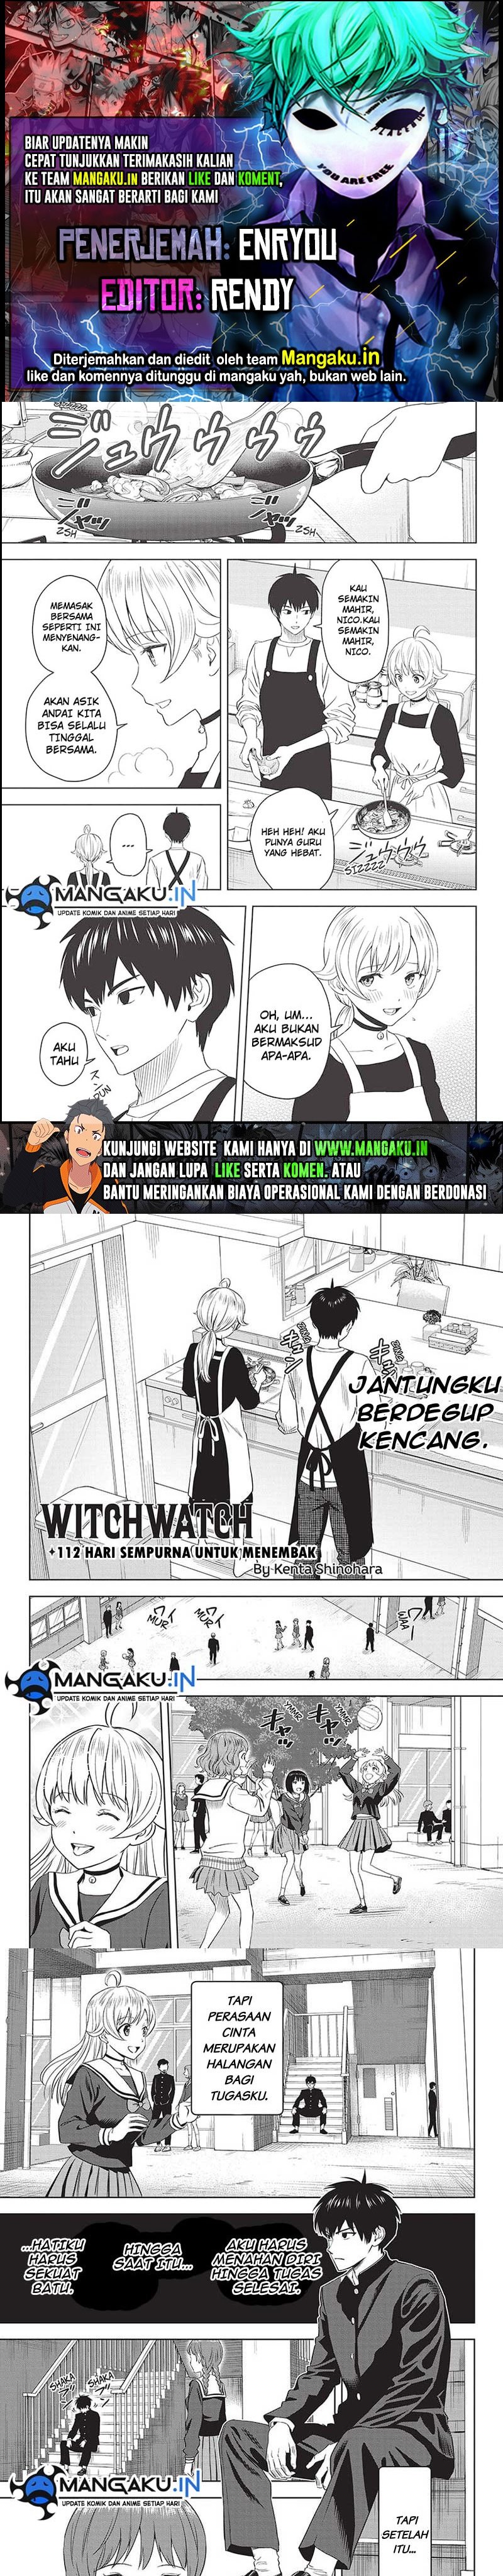 Witch Watch Chapter 112 1